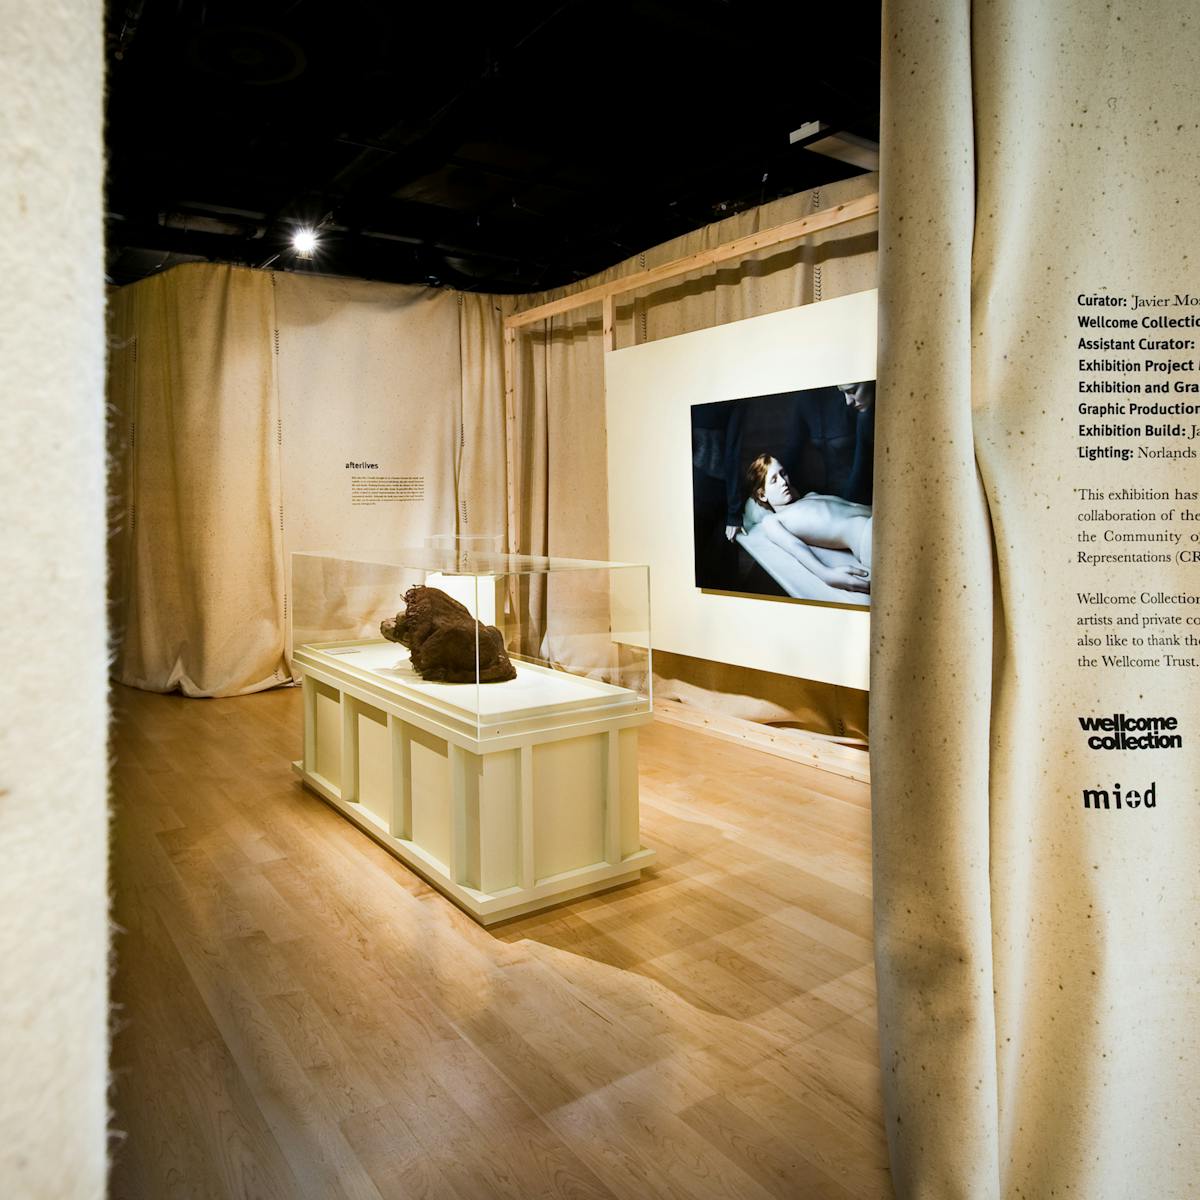 Photograph showing part of the exhibition, Skin, at Wellcome Collection.